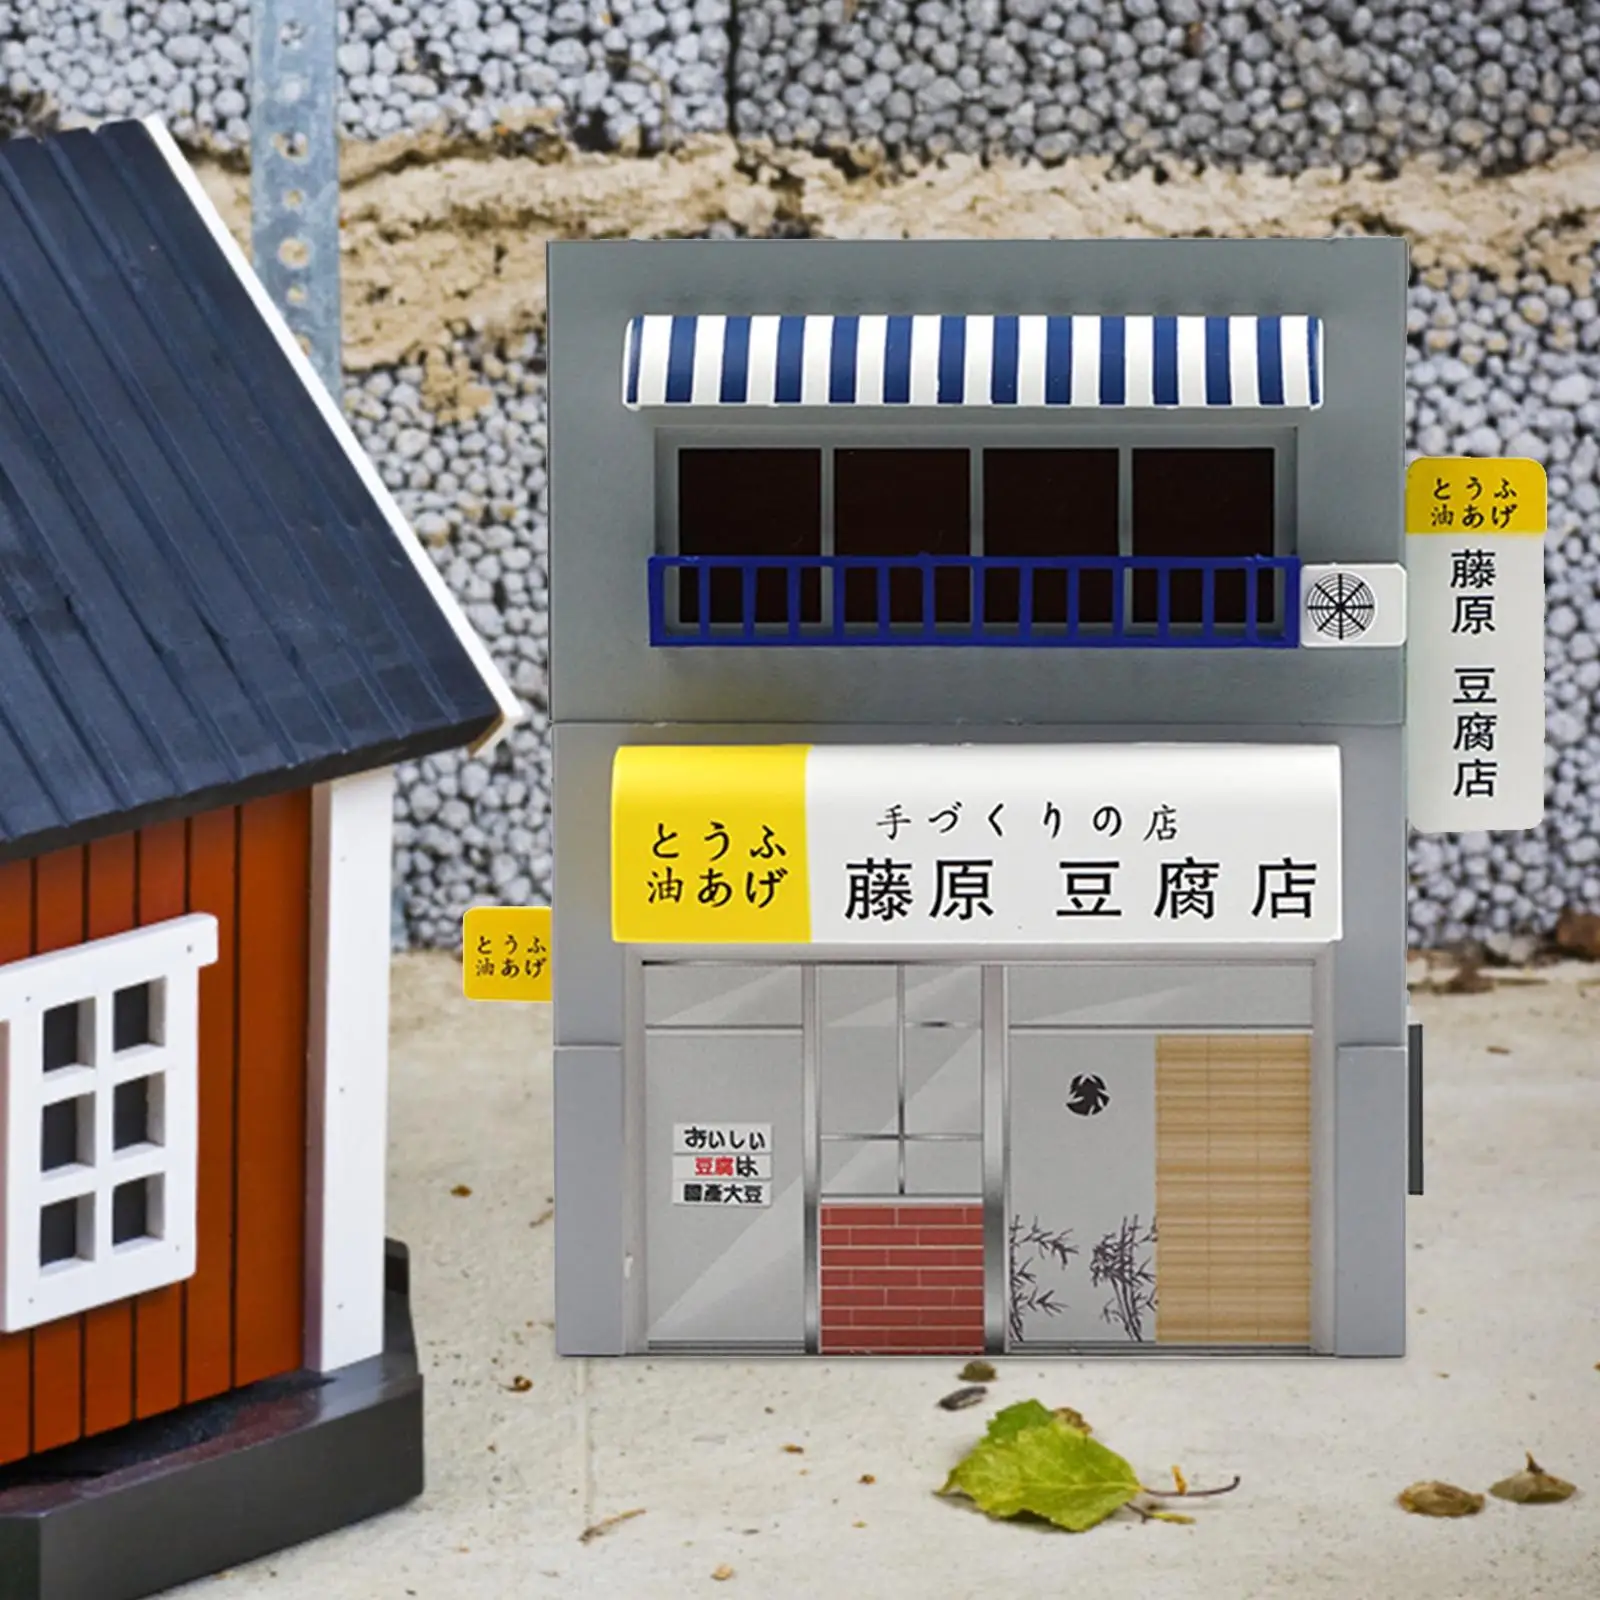 1/64 Tofu Shop Diorama Model Sand Table S Gauge Micro Landscape Desktop Collection DIY Projects Scenery Scenery Store Decoration